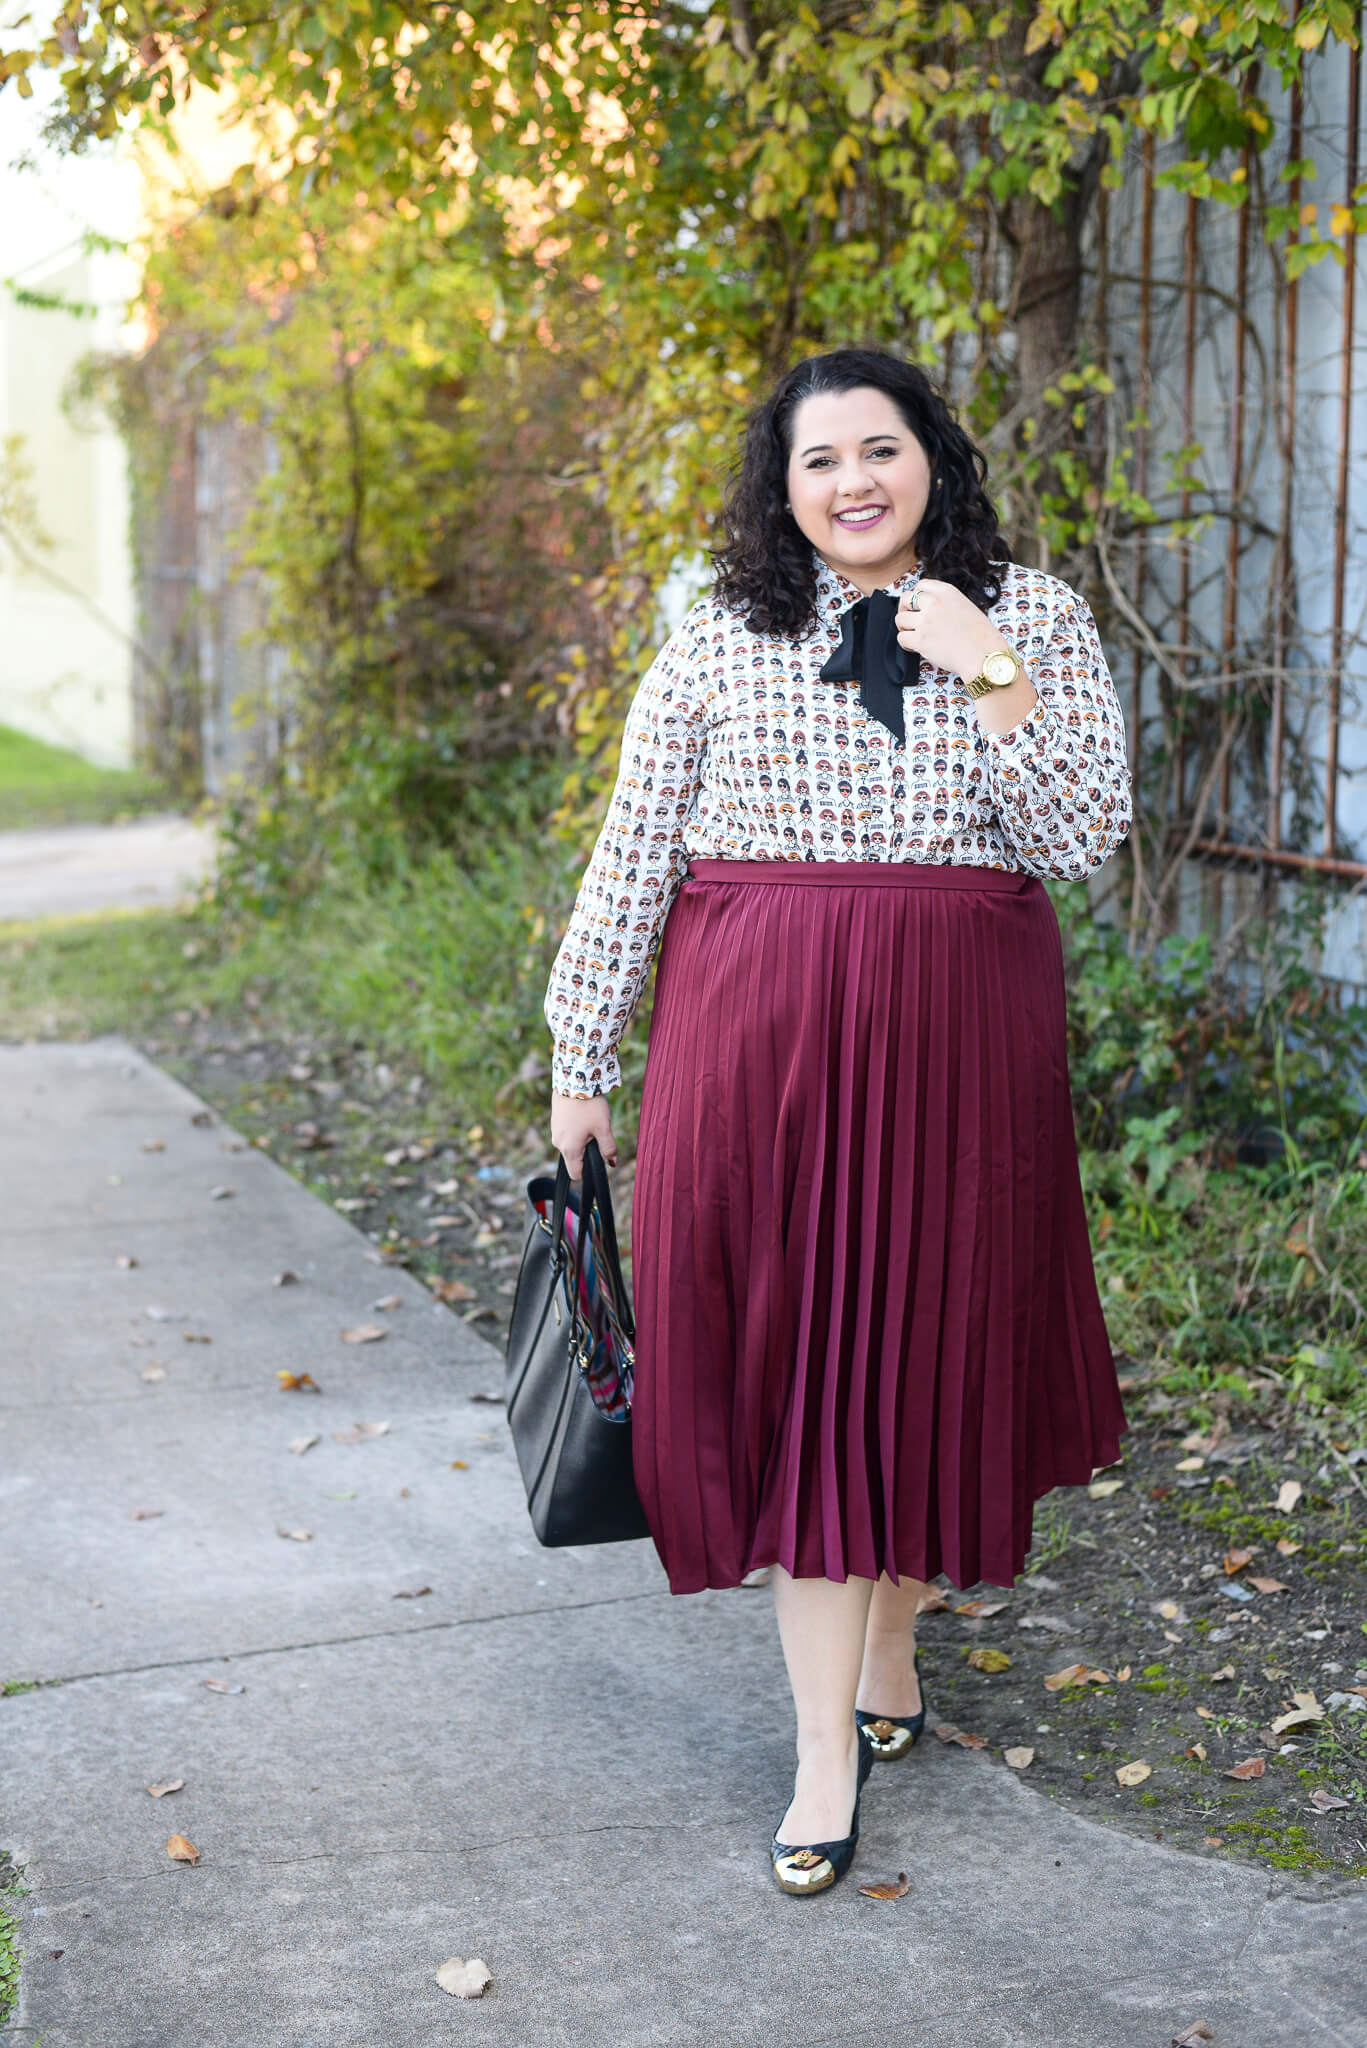 What to wear to work as a plus size woman